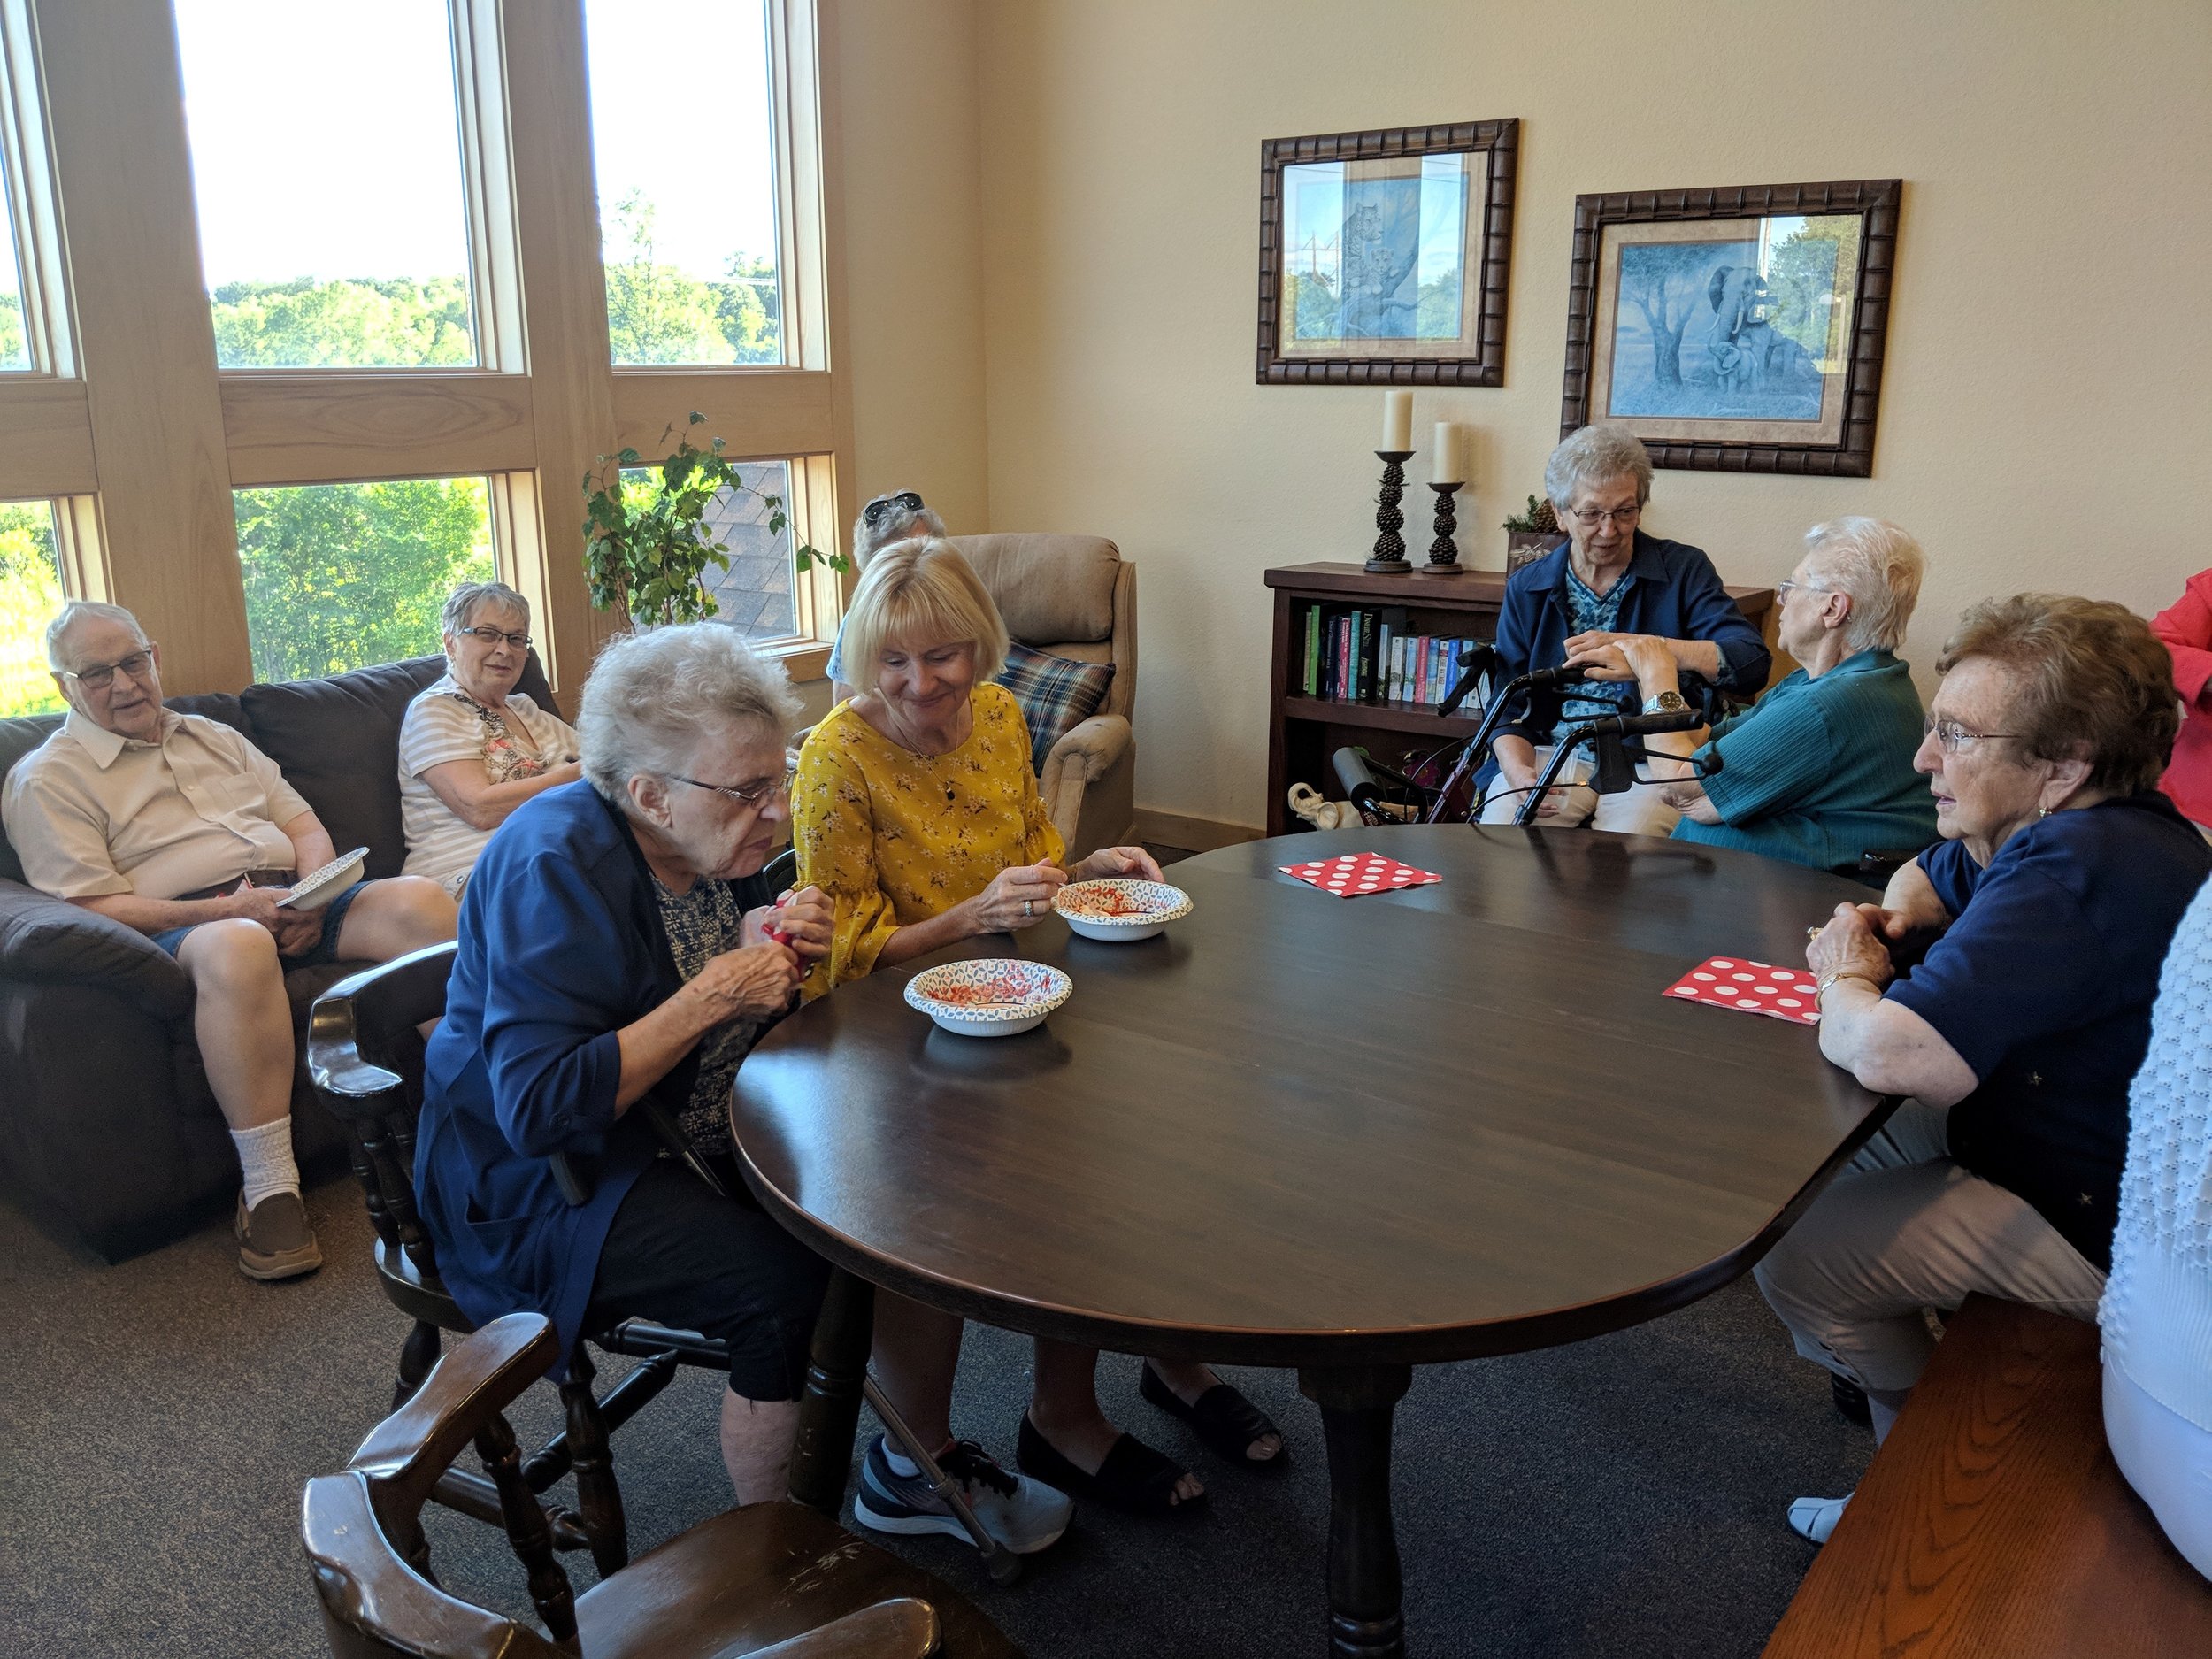 Strawberry Shortcake Family Social!! Free will donations were given towards the Alzheimer's Association. Thank you to everyone who came out and enjoyed this delicious treat for a great cause ❤️!.jpg